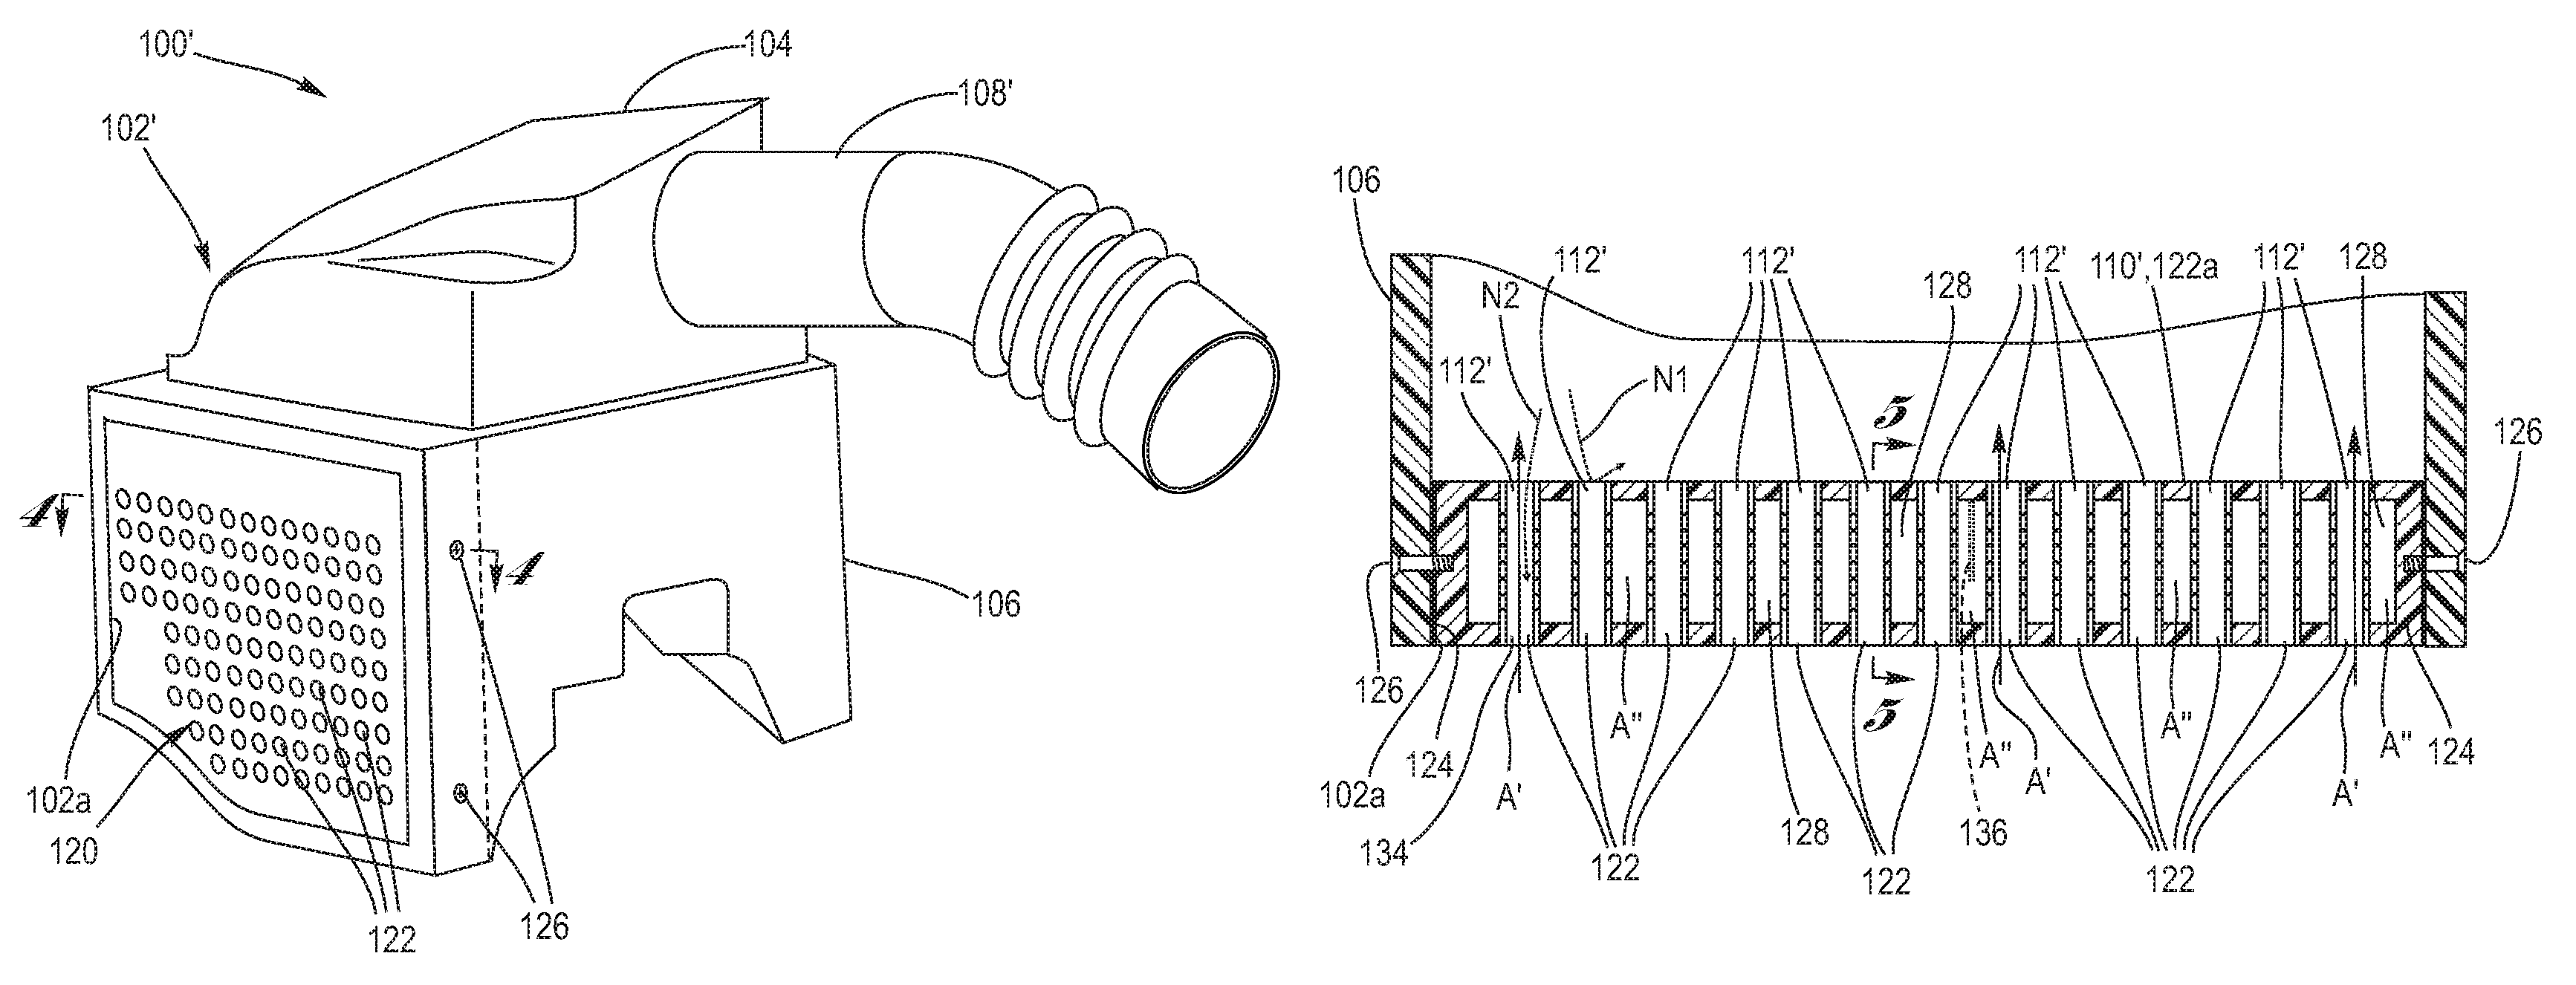 Air induction housing having a perforated wall and interfacing sound attenuation chamber